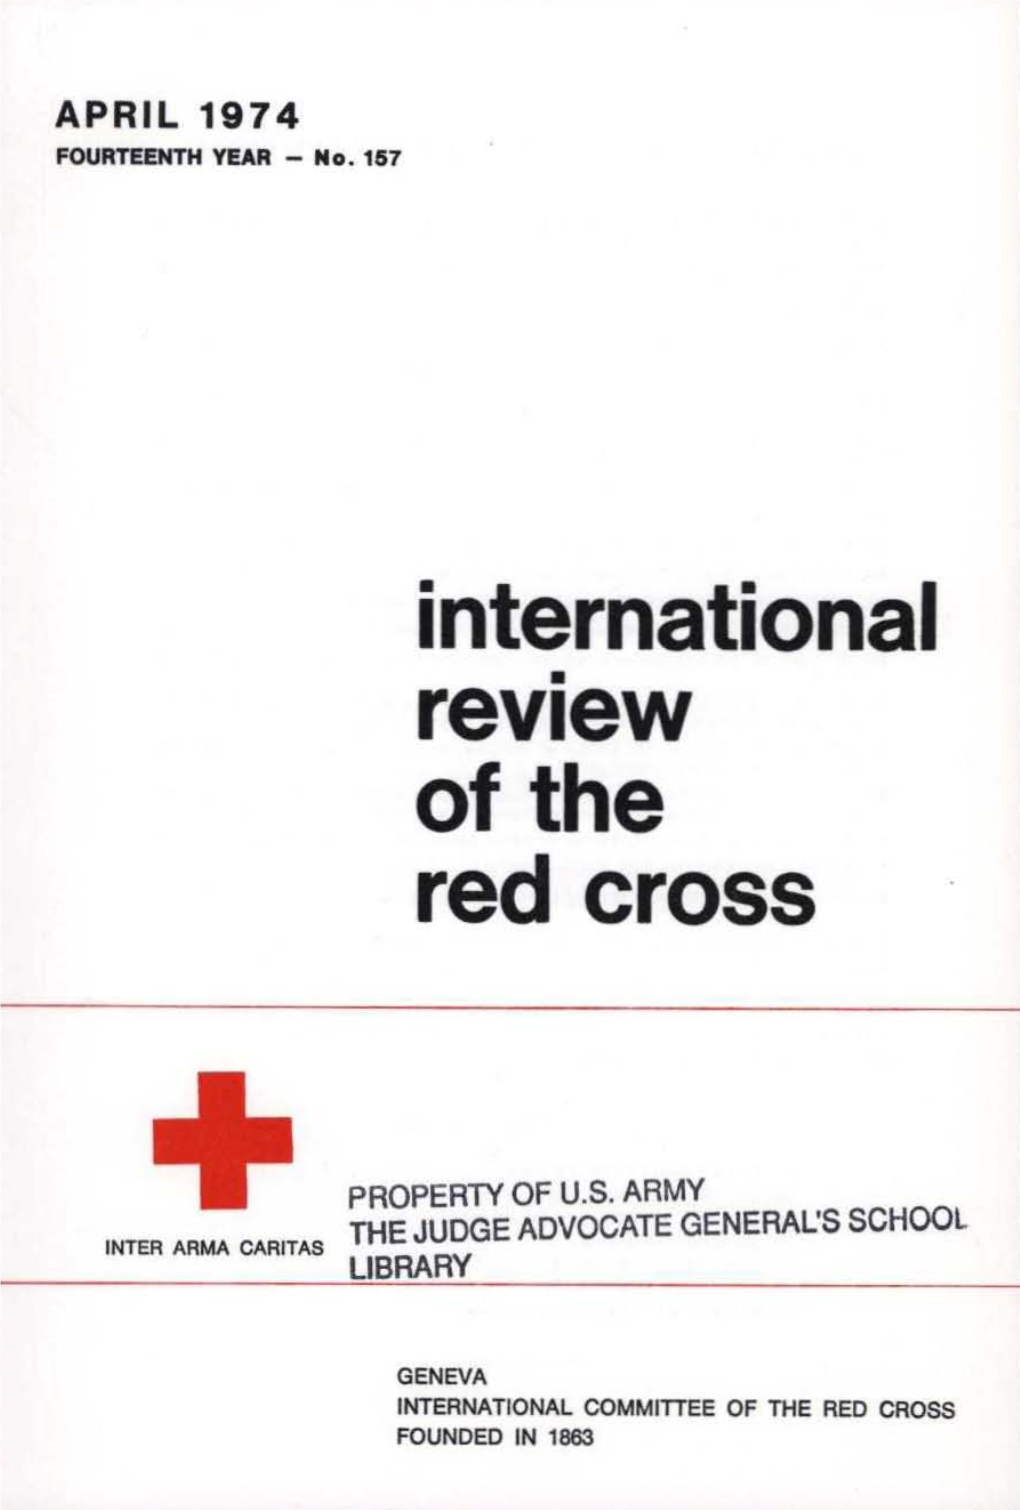 International Review of the Red Cross, April